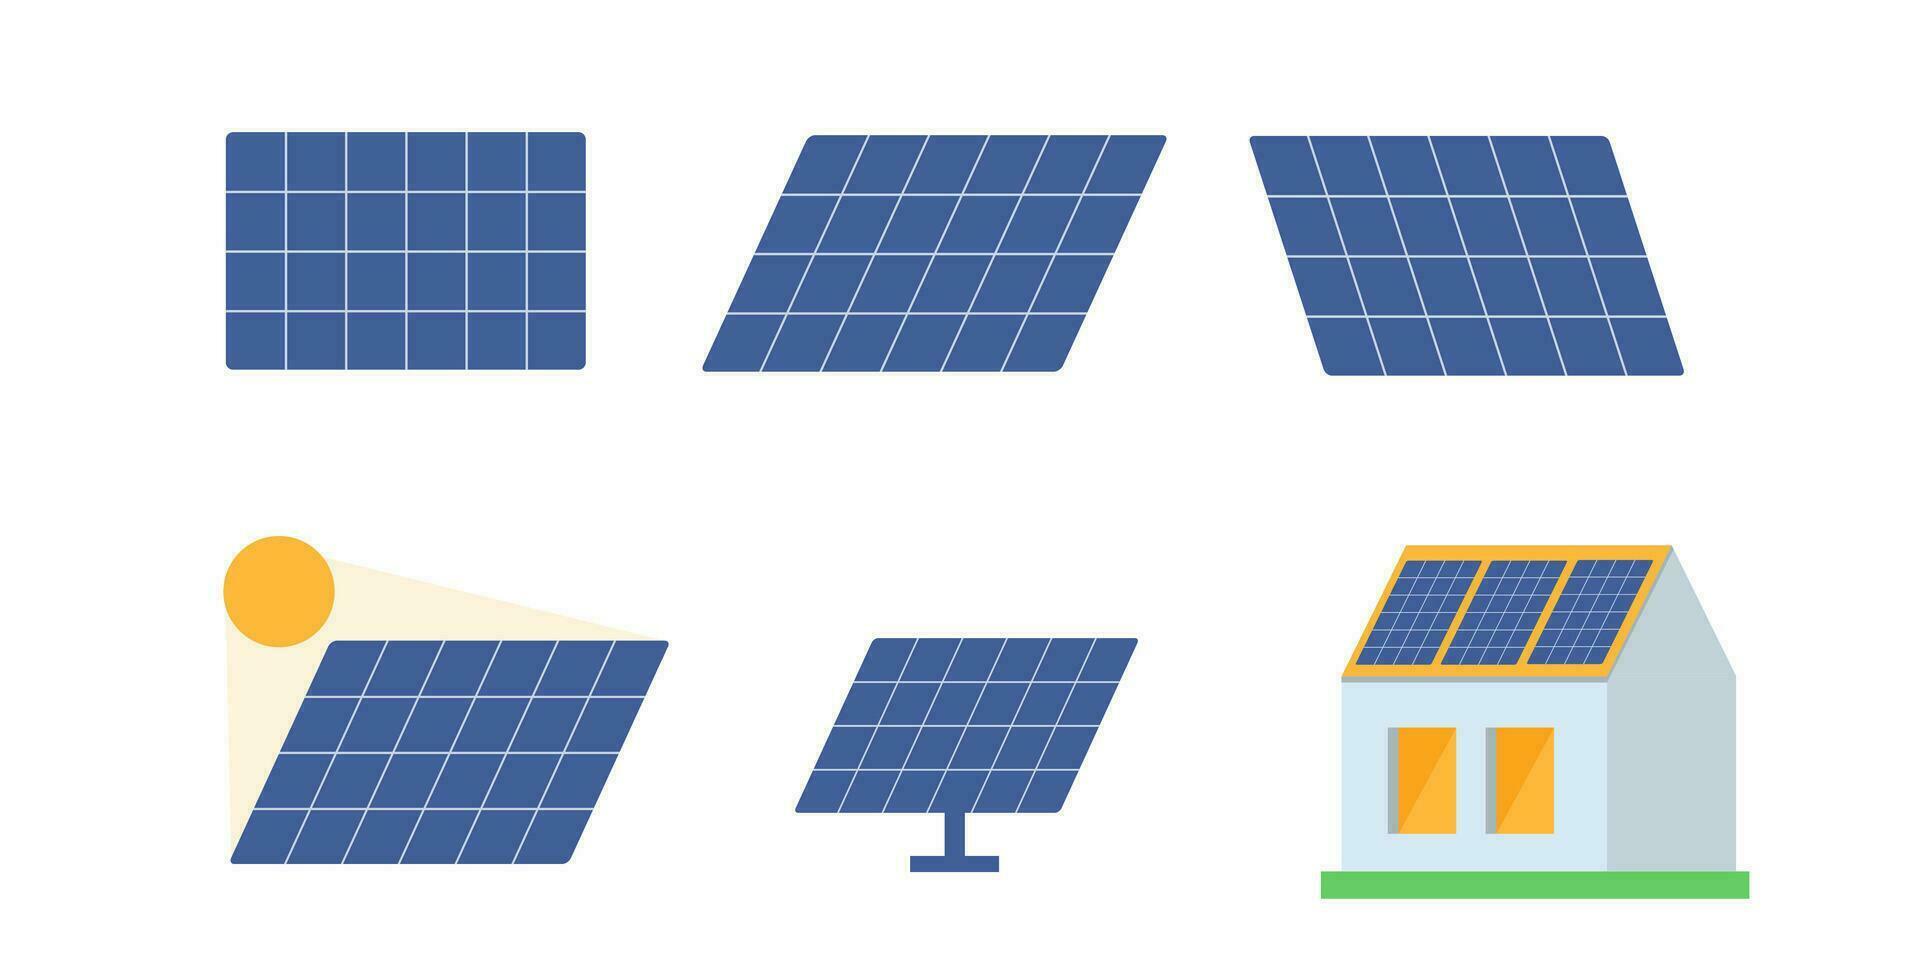 Set of solar panels on white background. Pv panels. Photovoltaic panels on house roof. Renewable energy concept. Vector illustration.